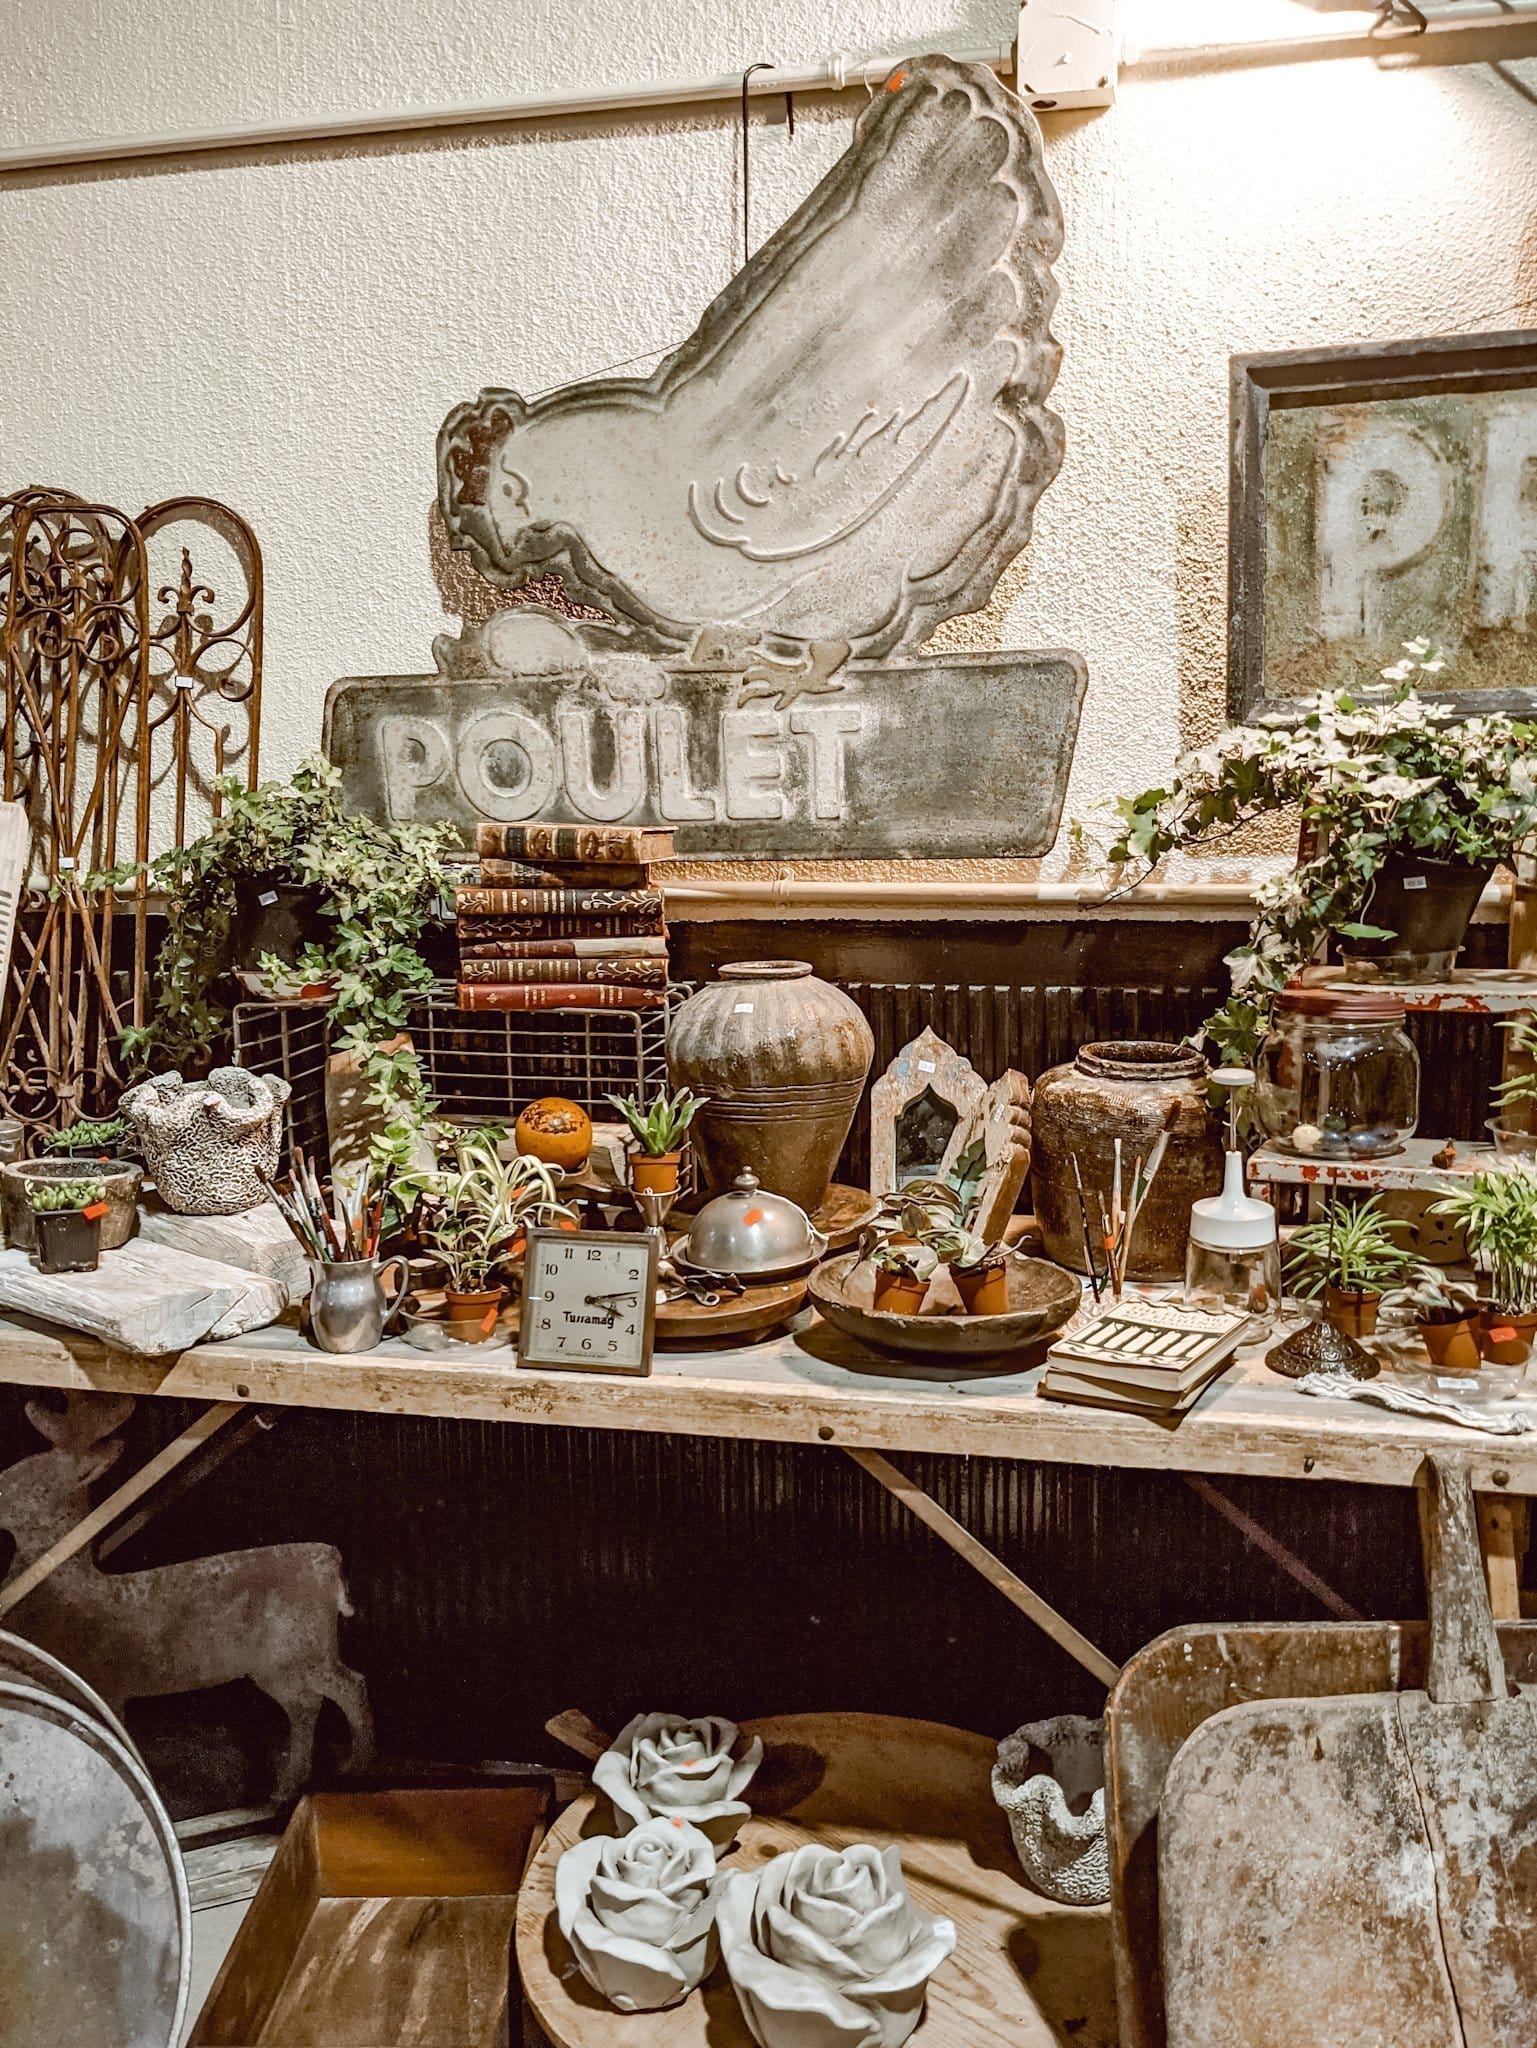 What to Expect at a Vintage Market Days Event